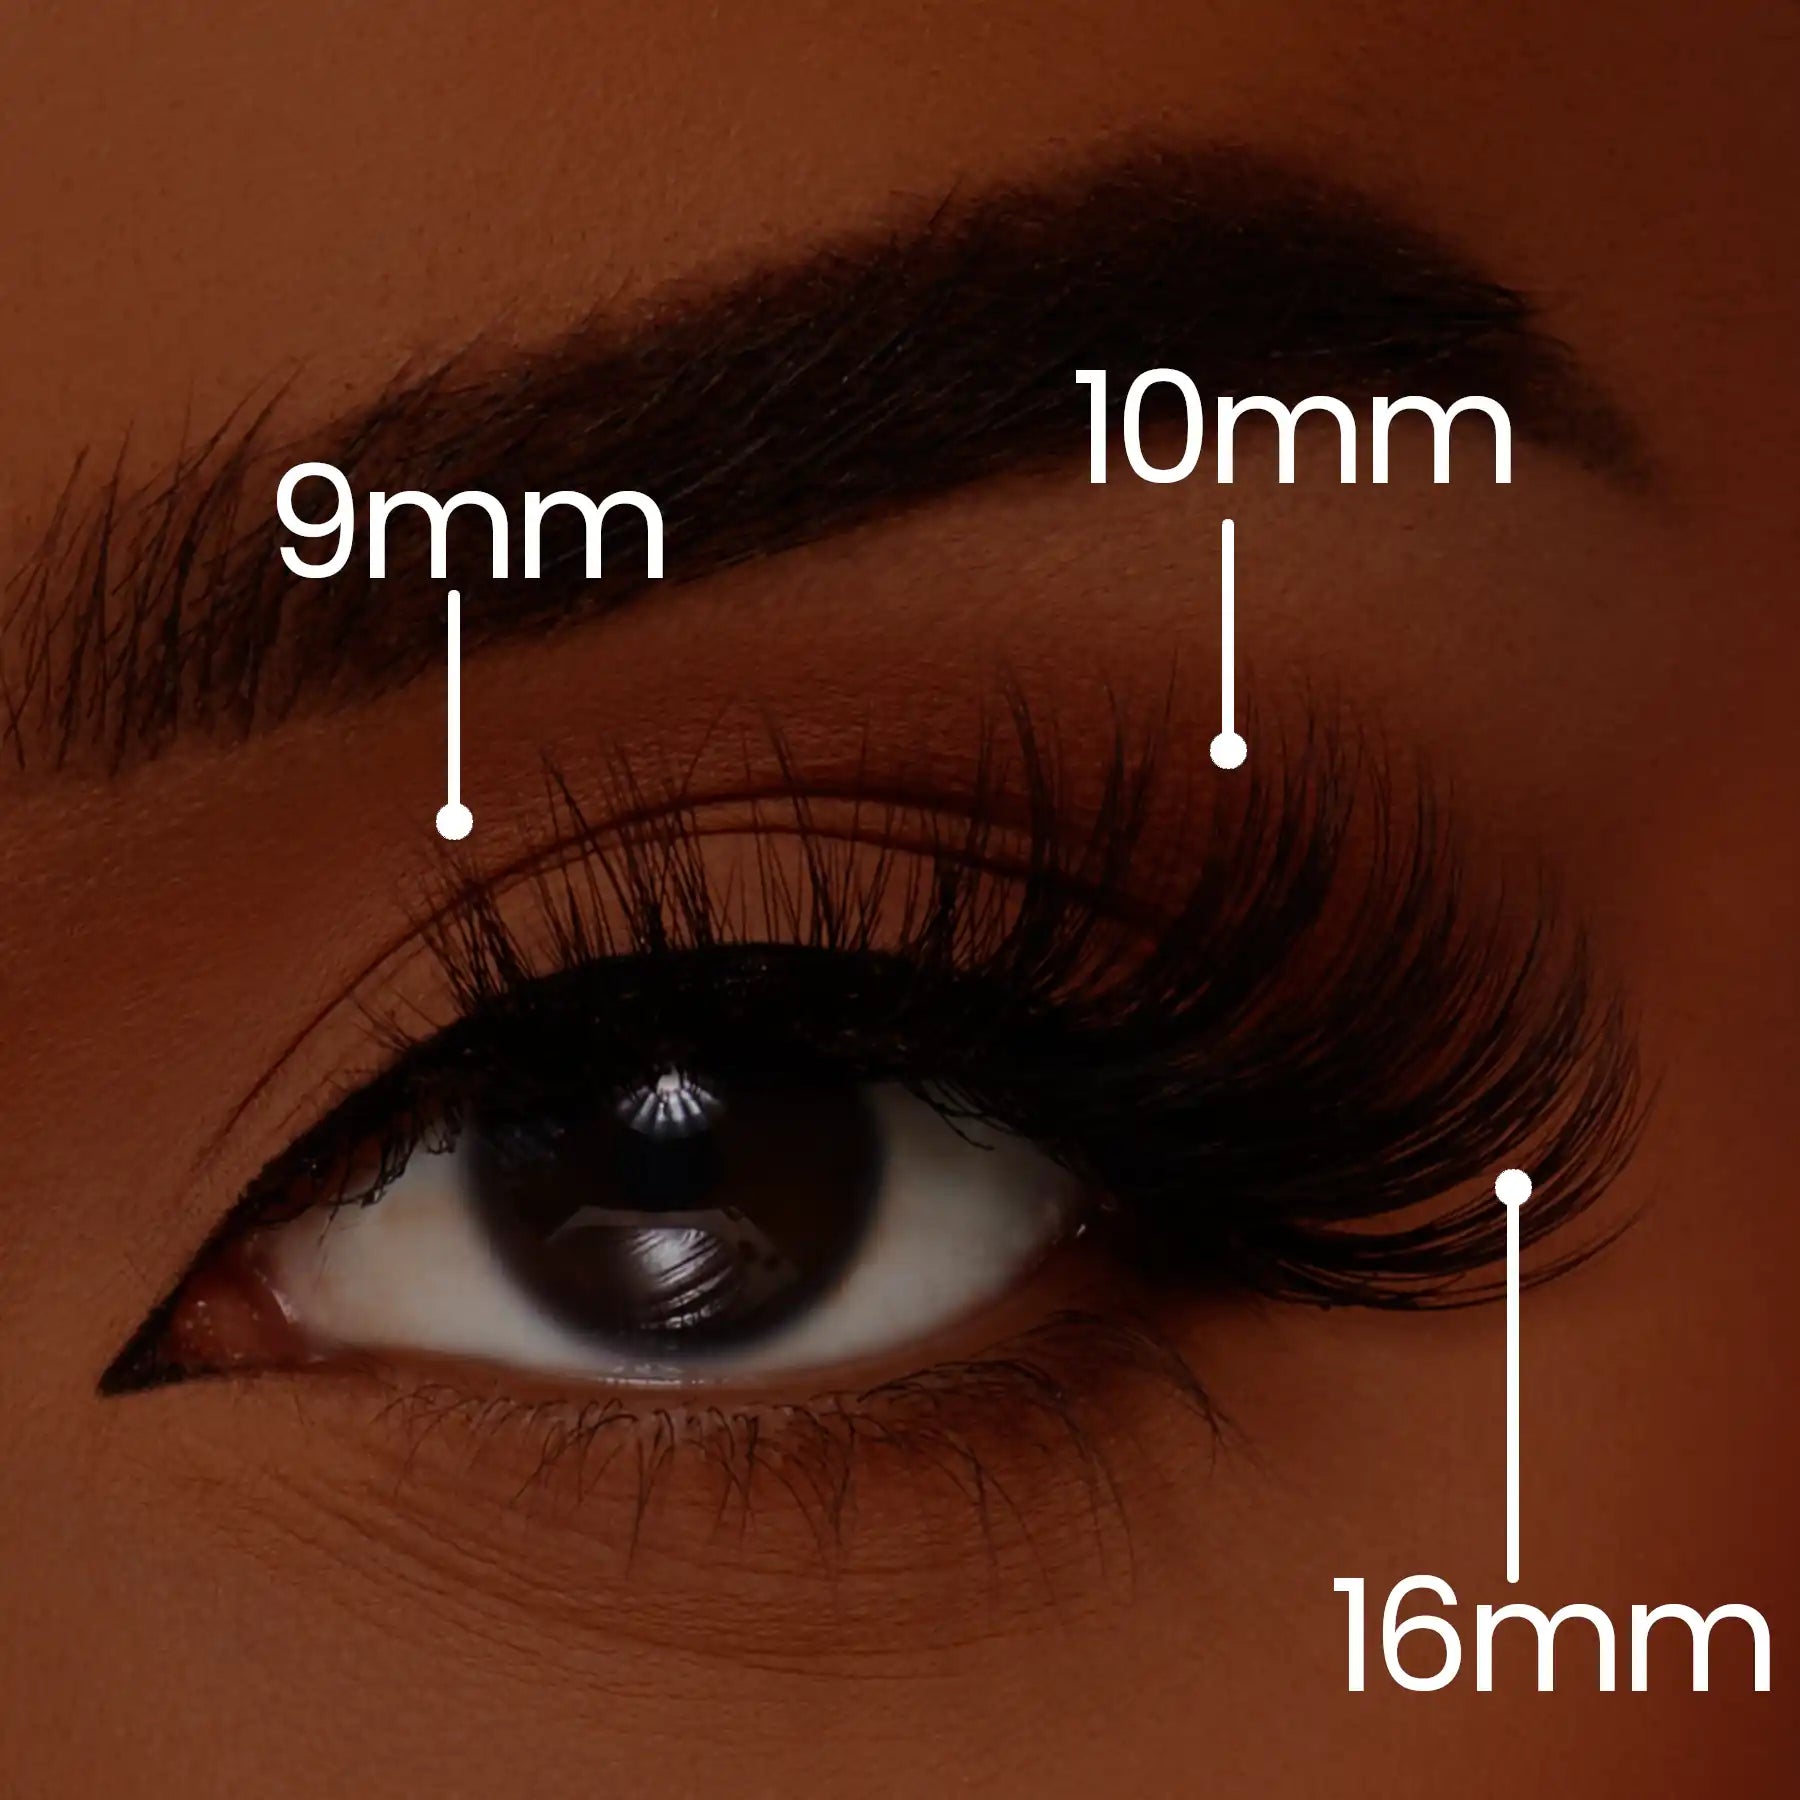 female model wearing IDGAF lashes showing length specifications from inner to outer eye:9mm, 10mm, 16mm